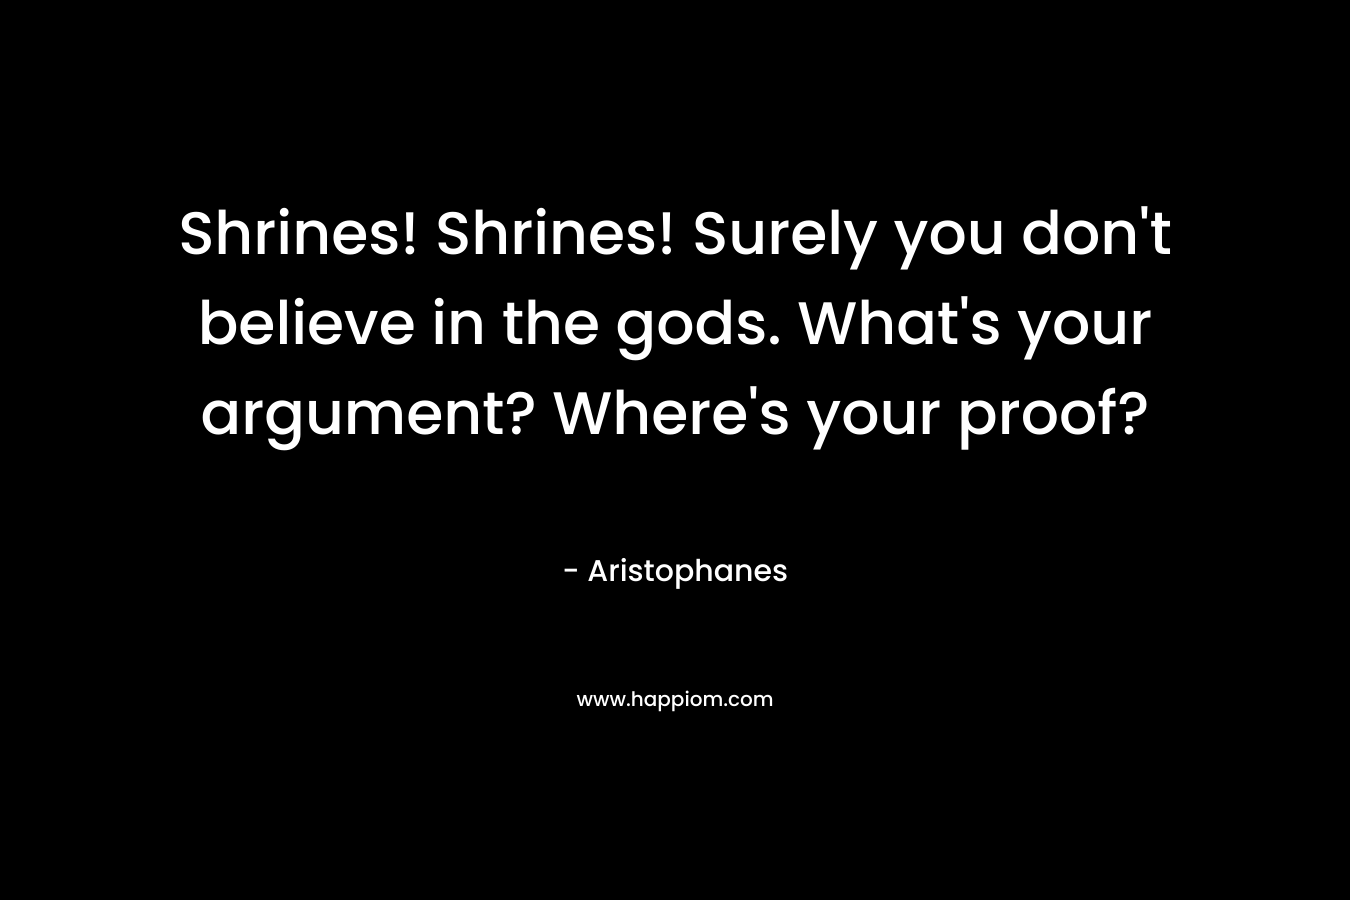 Shrines! Shrines! Surely you don’t believe in the gods. What’s your argument? Where’s your proof? – Aristophanes